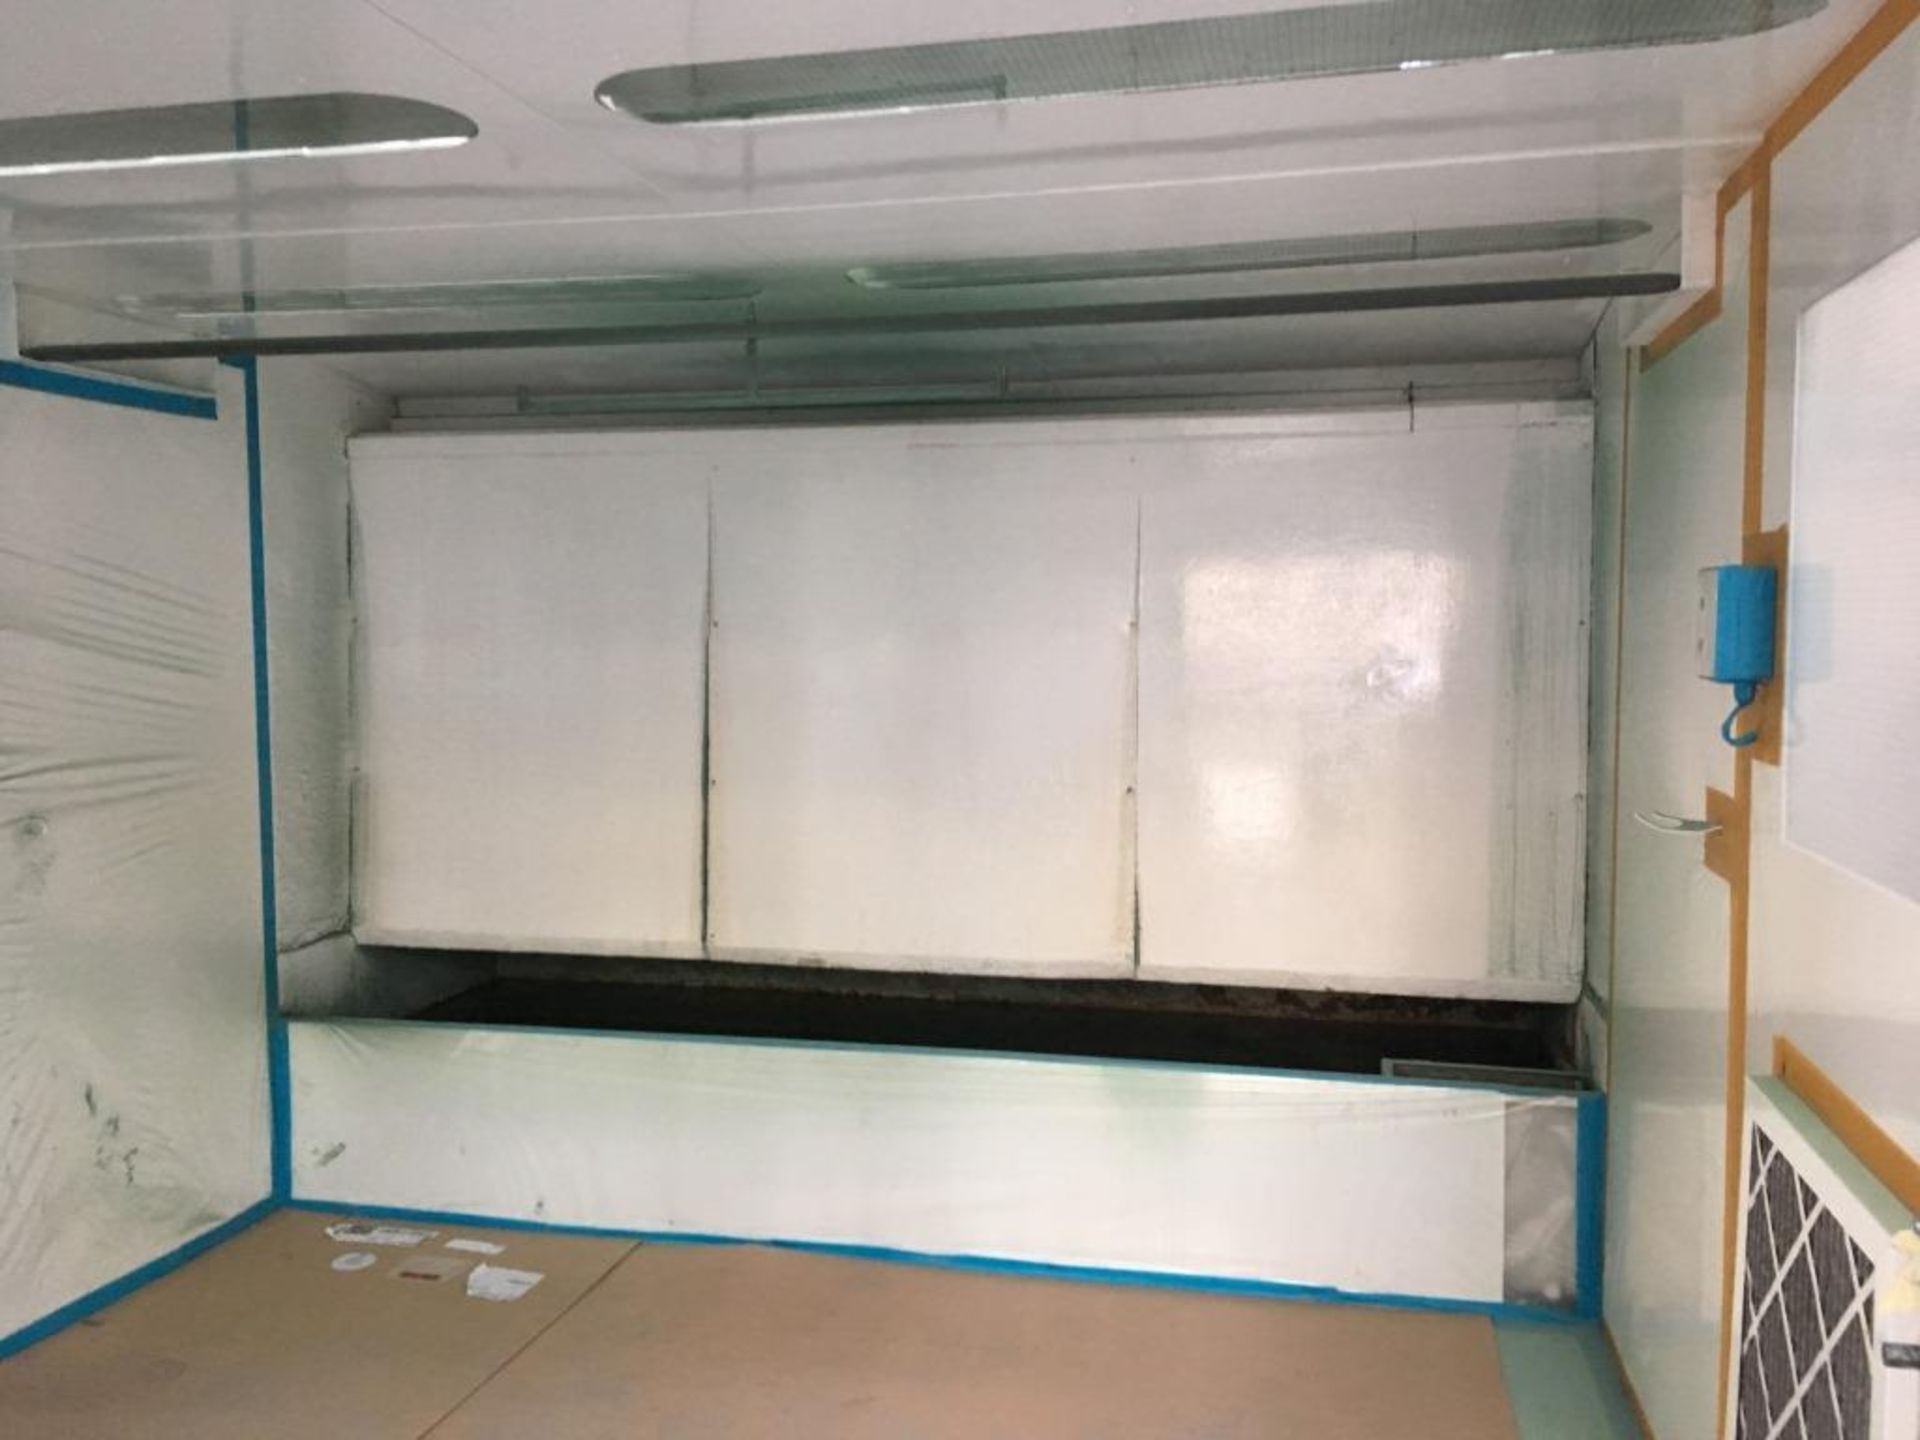 Fabricated spray booth in wet back extraction room and drying room, approx. external dimensions 4.4m - Image 2 of 4